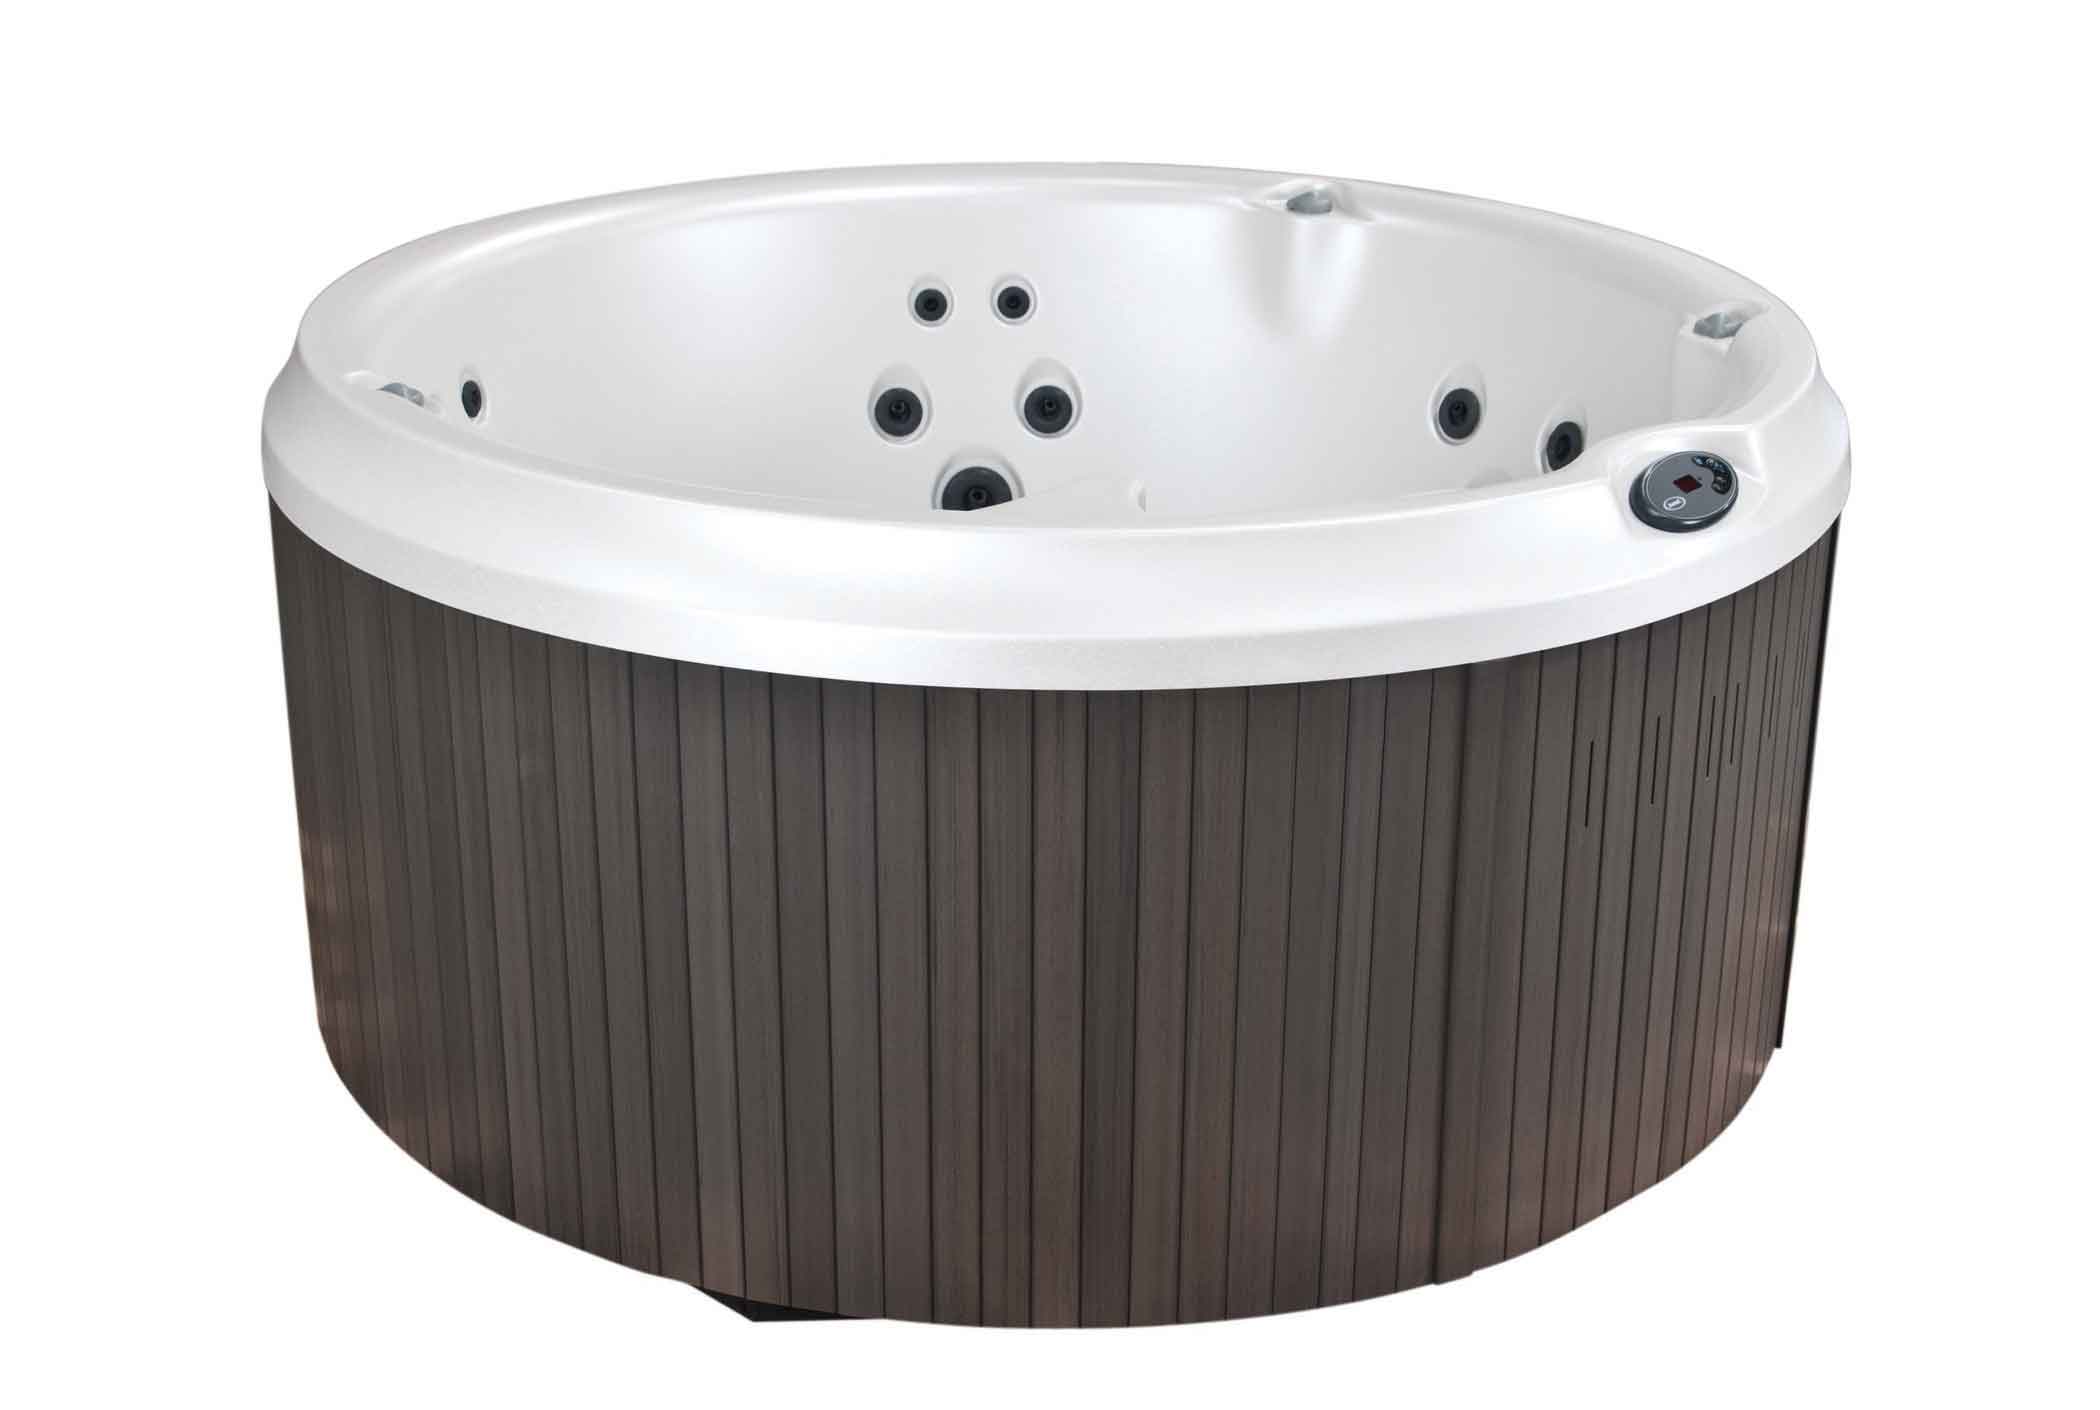 Jacuzzi J-210 Hot Tub for Sale at Nutley Pool and Spa